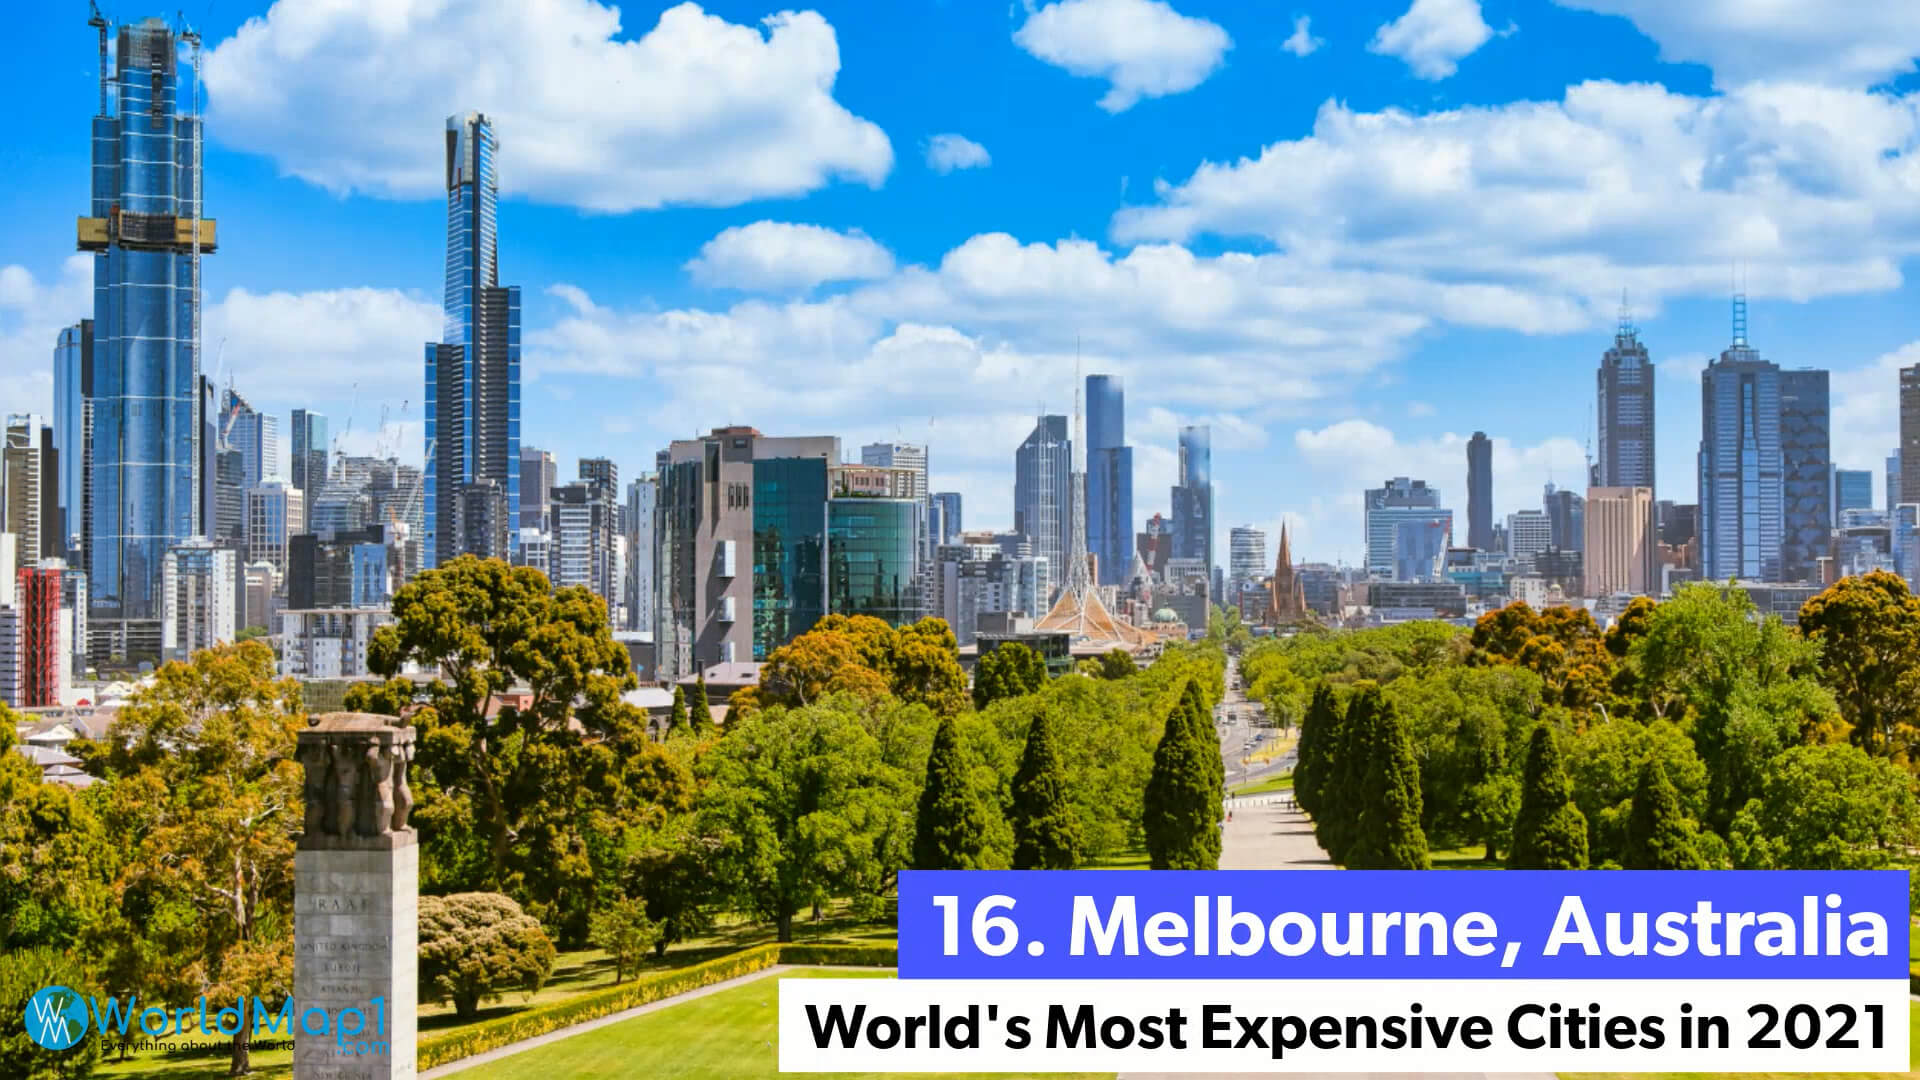 World's Most Expensive Cities - Melbourne, Australia